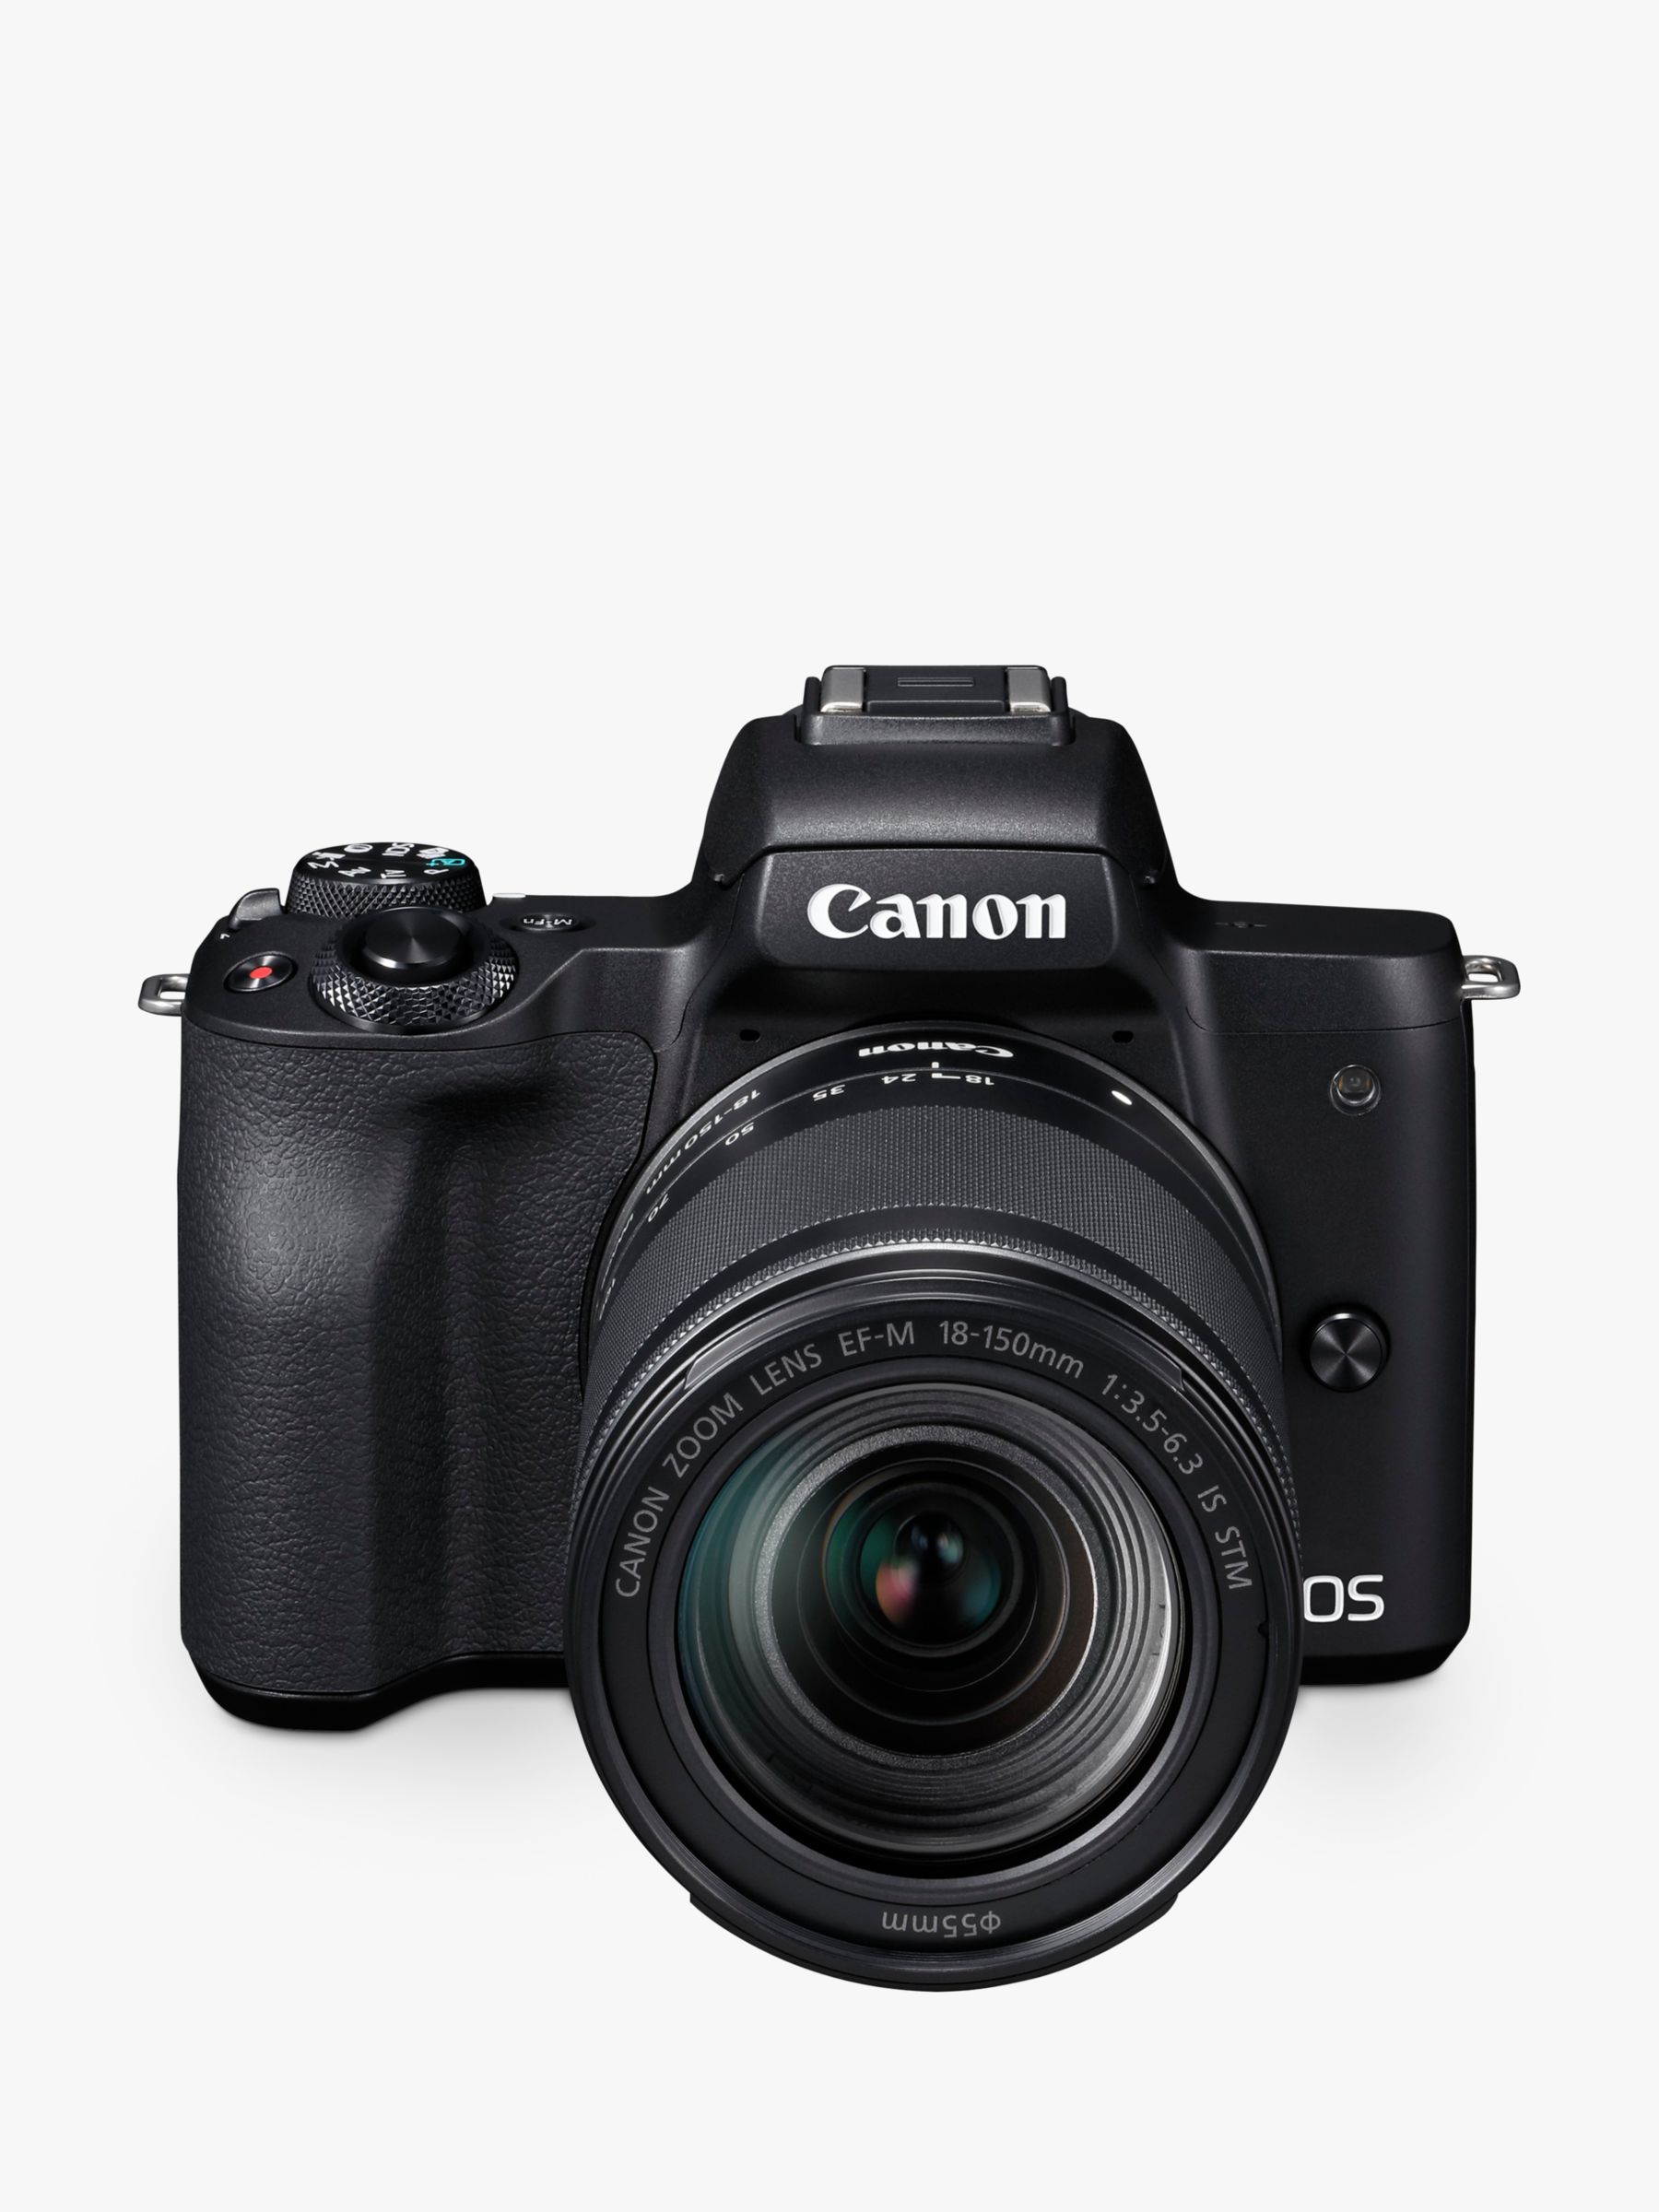 Canon EOS M50 Compact System Camera with EF-M 18-150mm f/3.5-6.3 IS STM lens, 4K Ultra HD, 24.1MP, Wi-Fi, Bluetooth, NFC, OLED EVF, 3 Vari-Angle Touch Screen